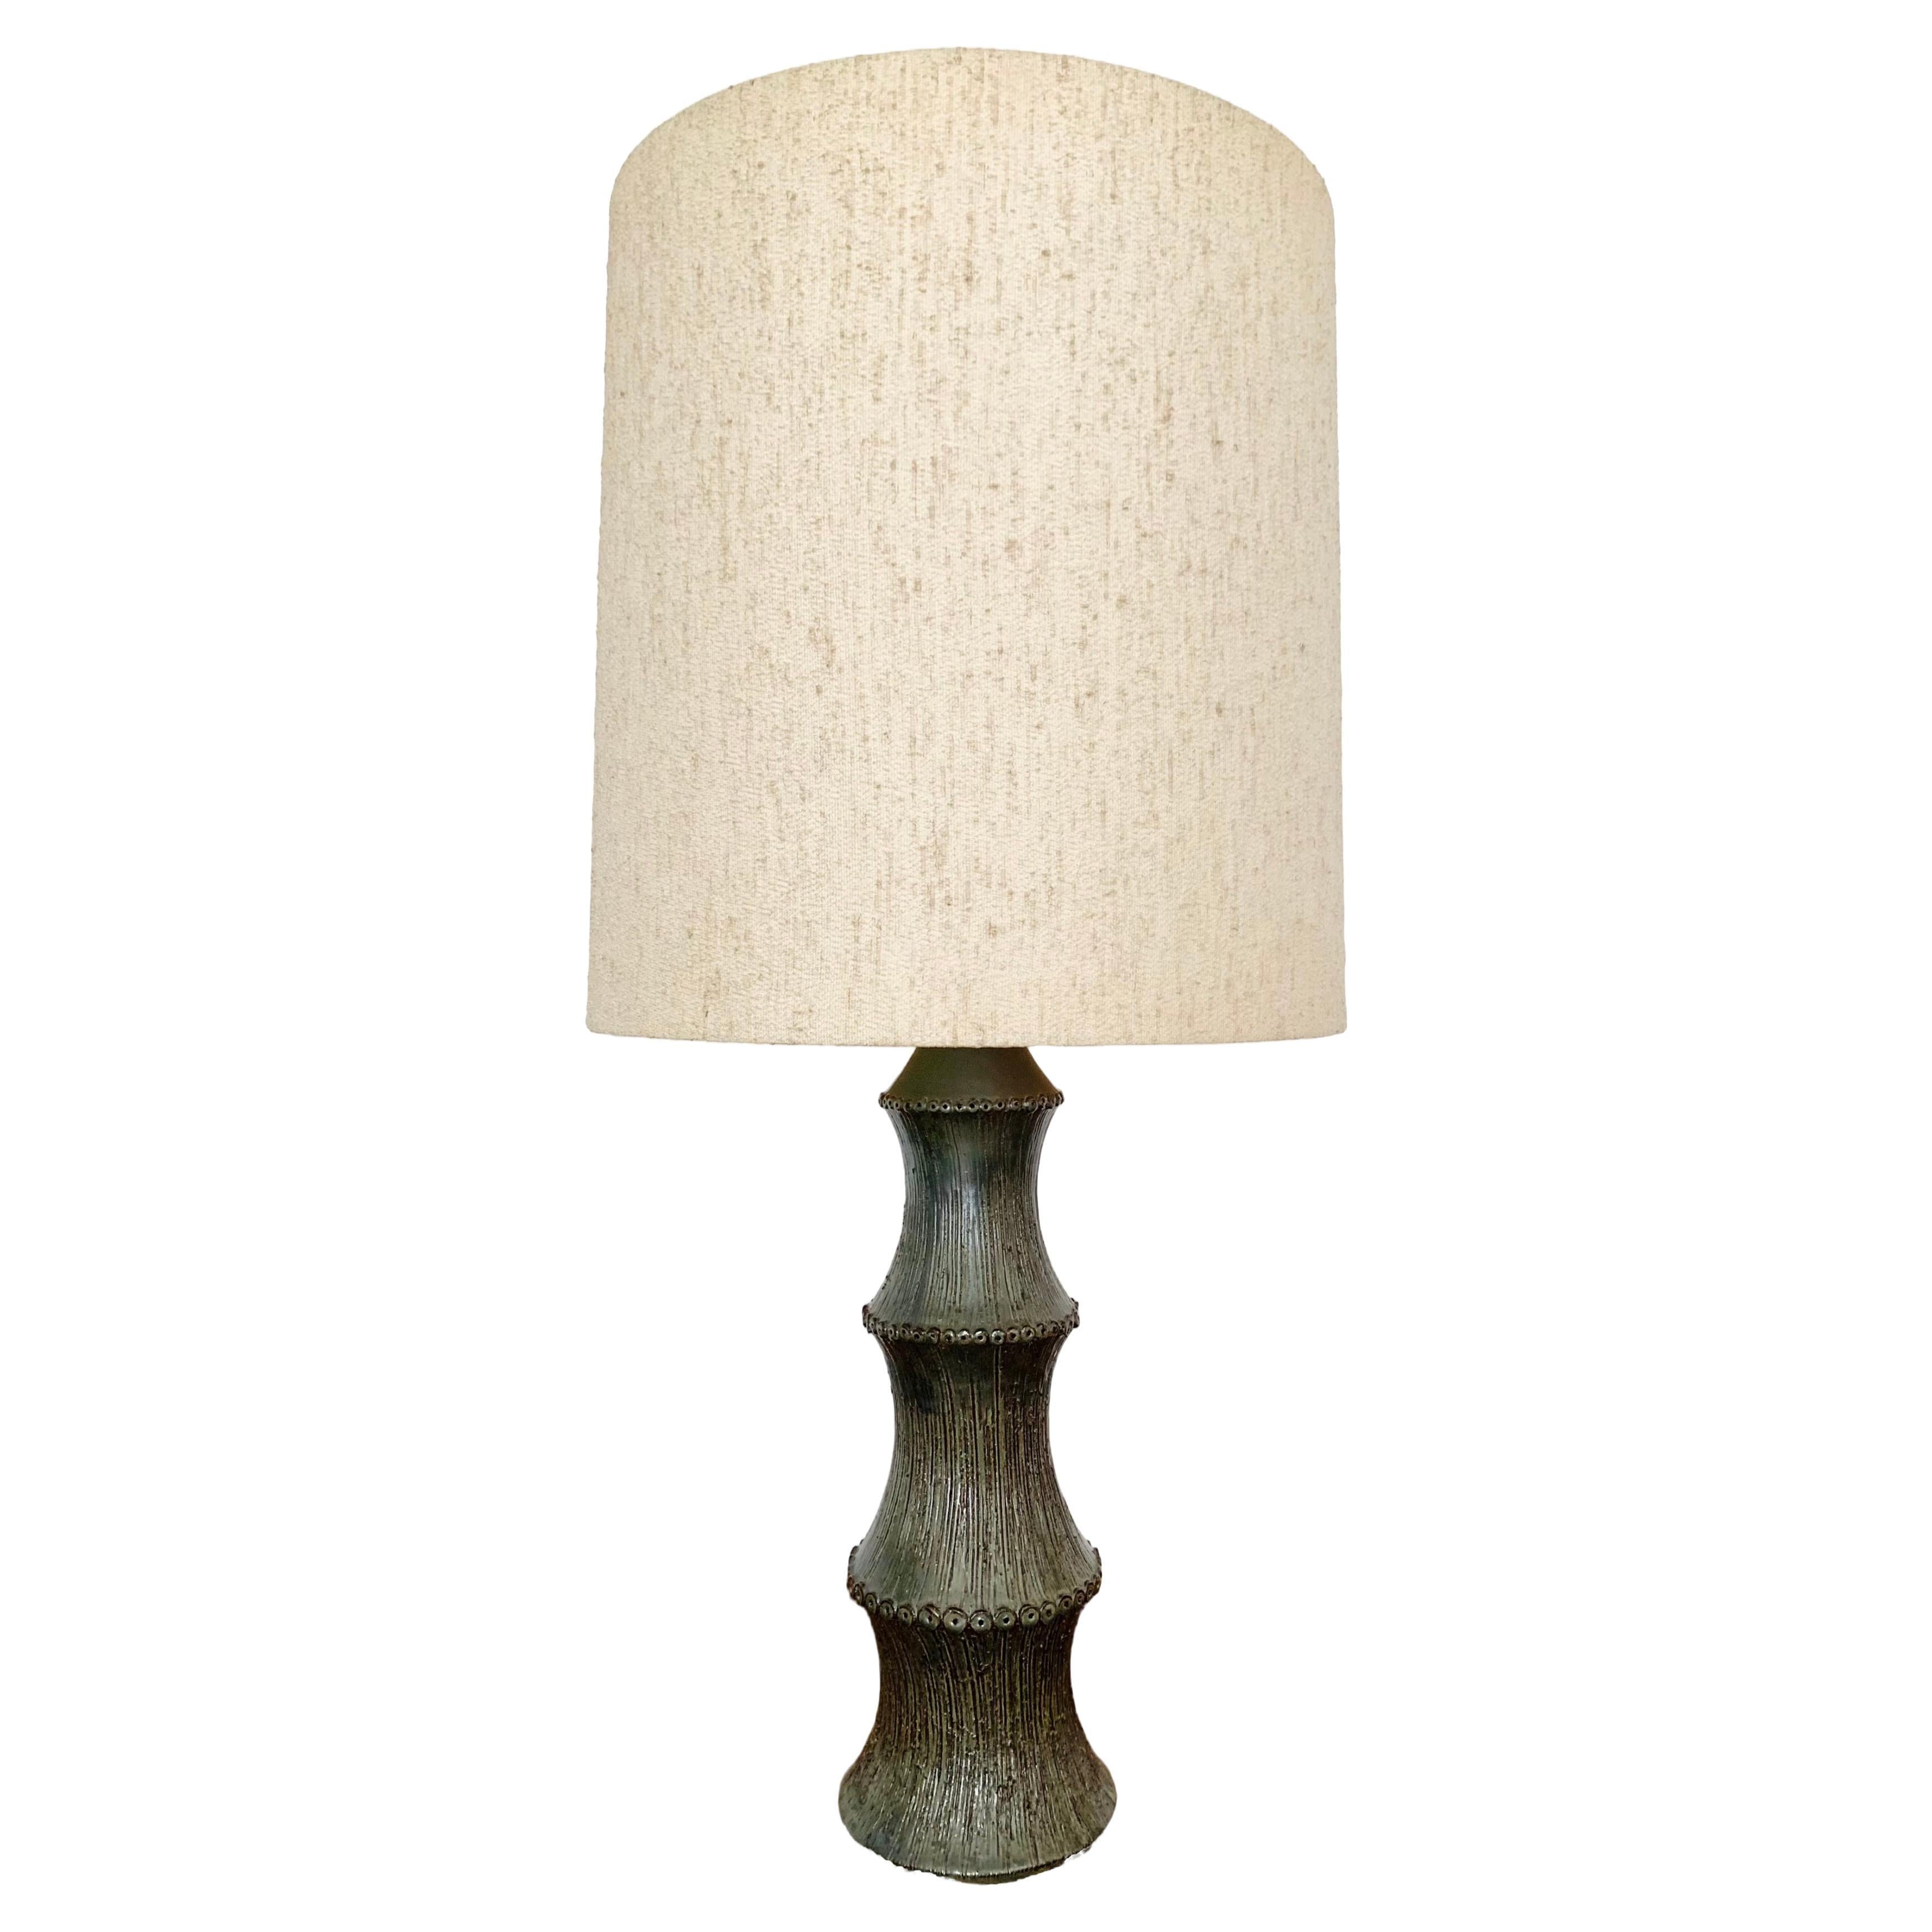 Large Ceramic Table Lamp For Sale